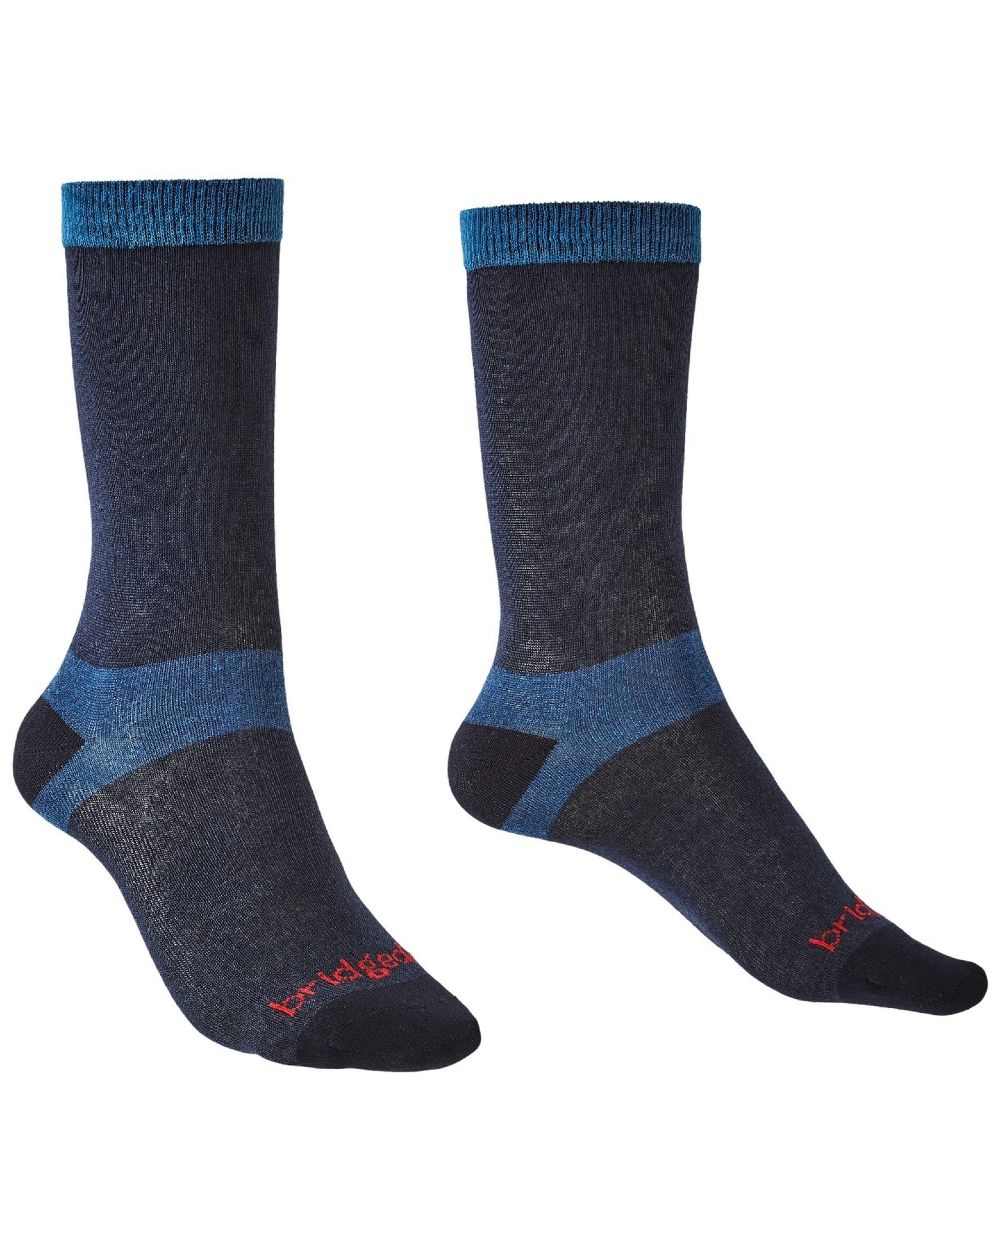 Navy coloured Bridgedale Womens Base Layer Coolmax Liner Socks - Twin Pack on white background 